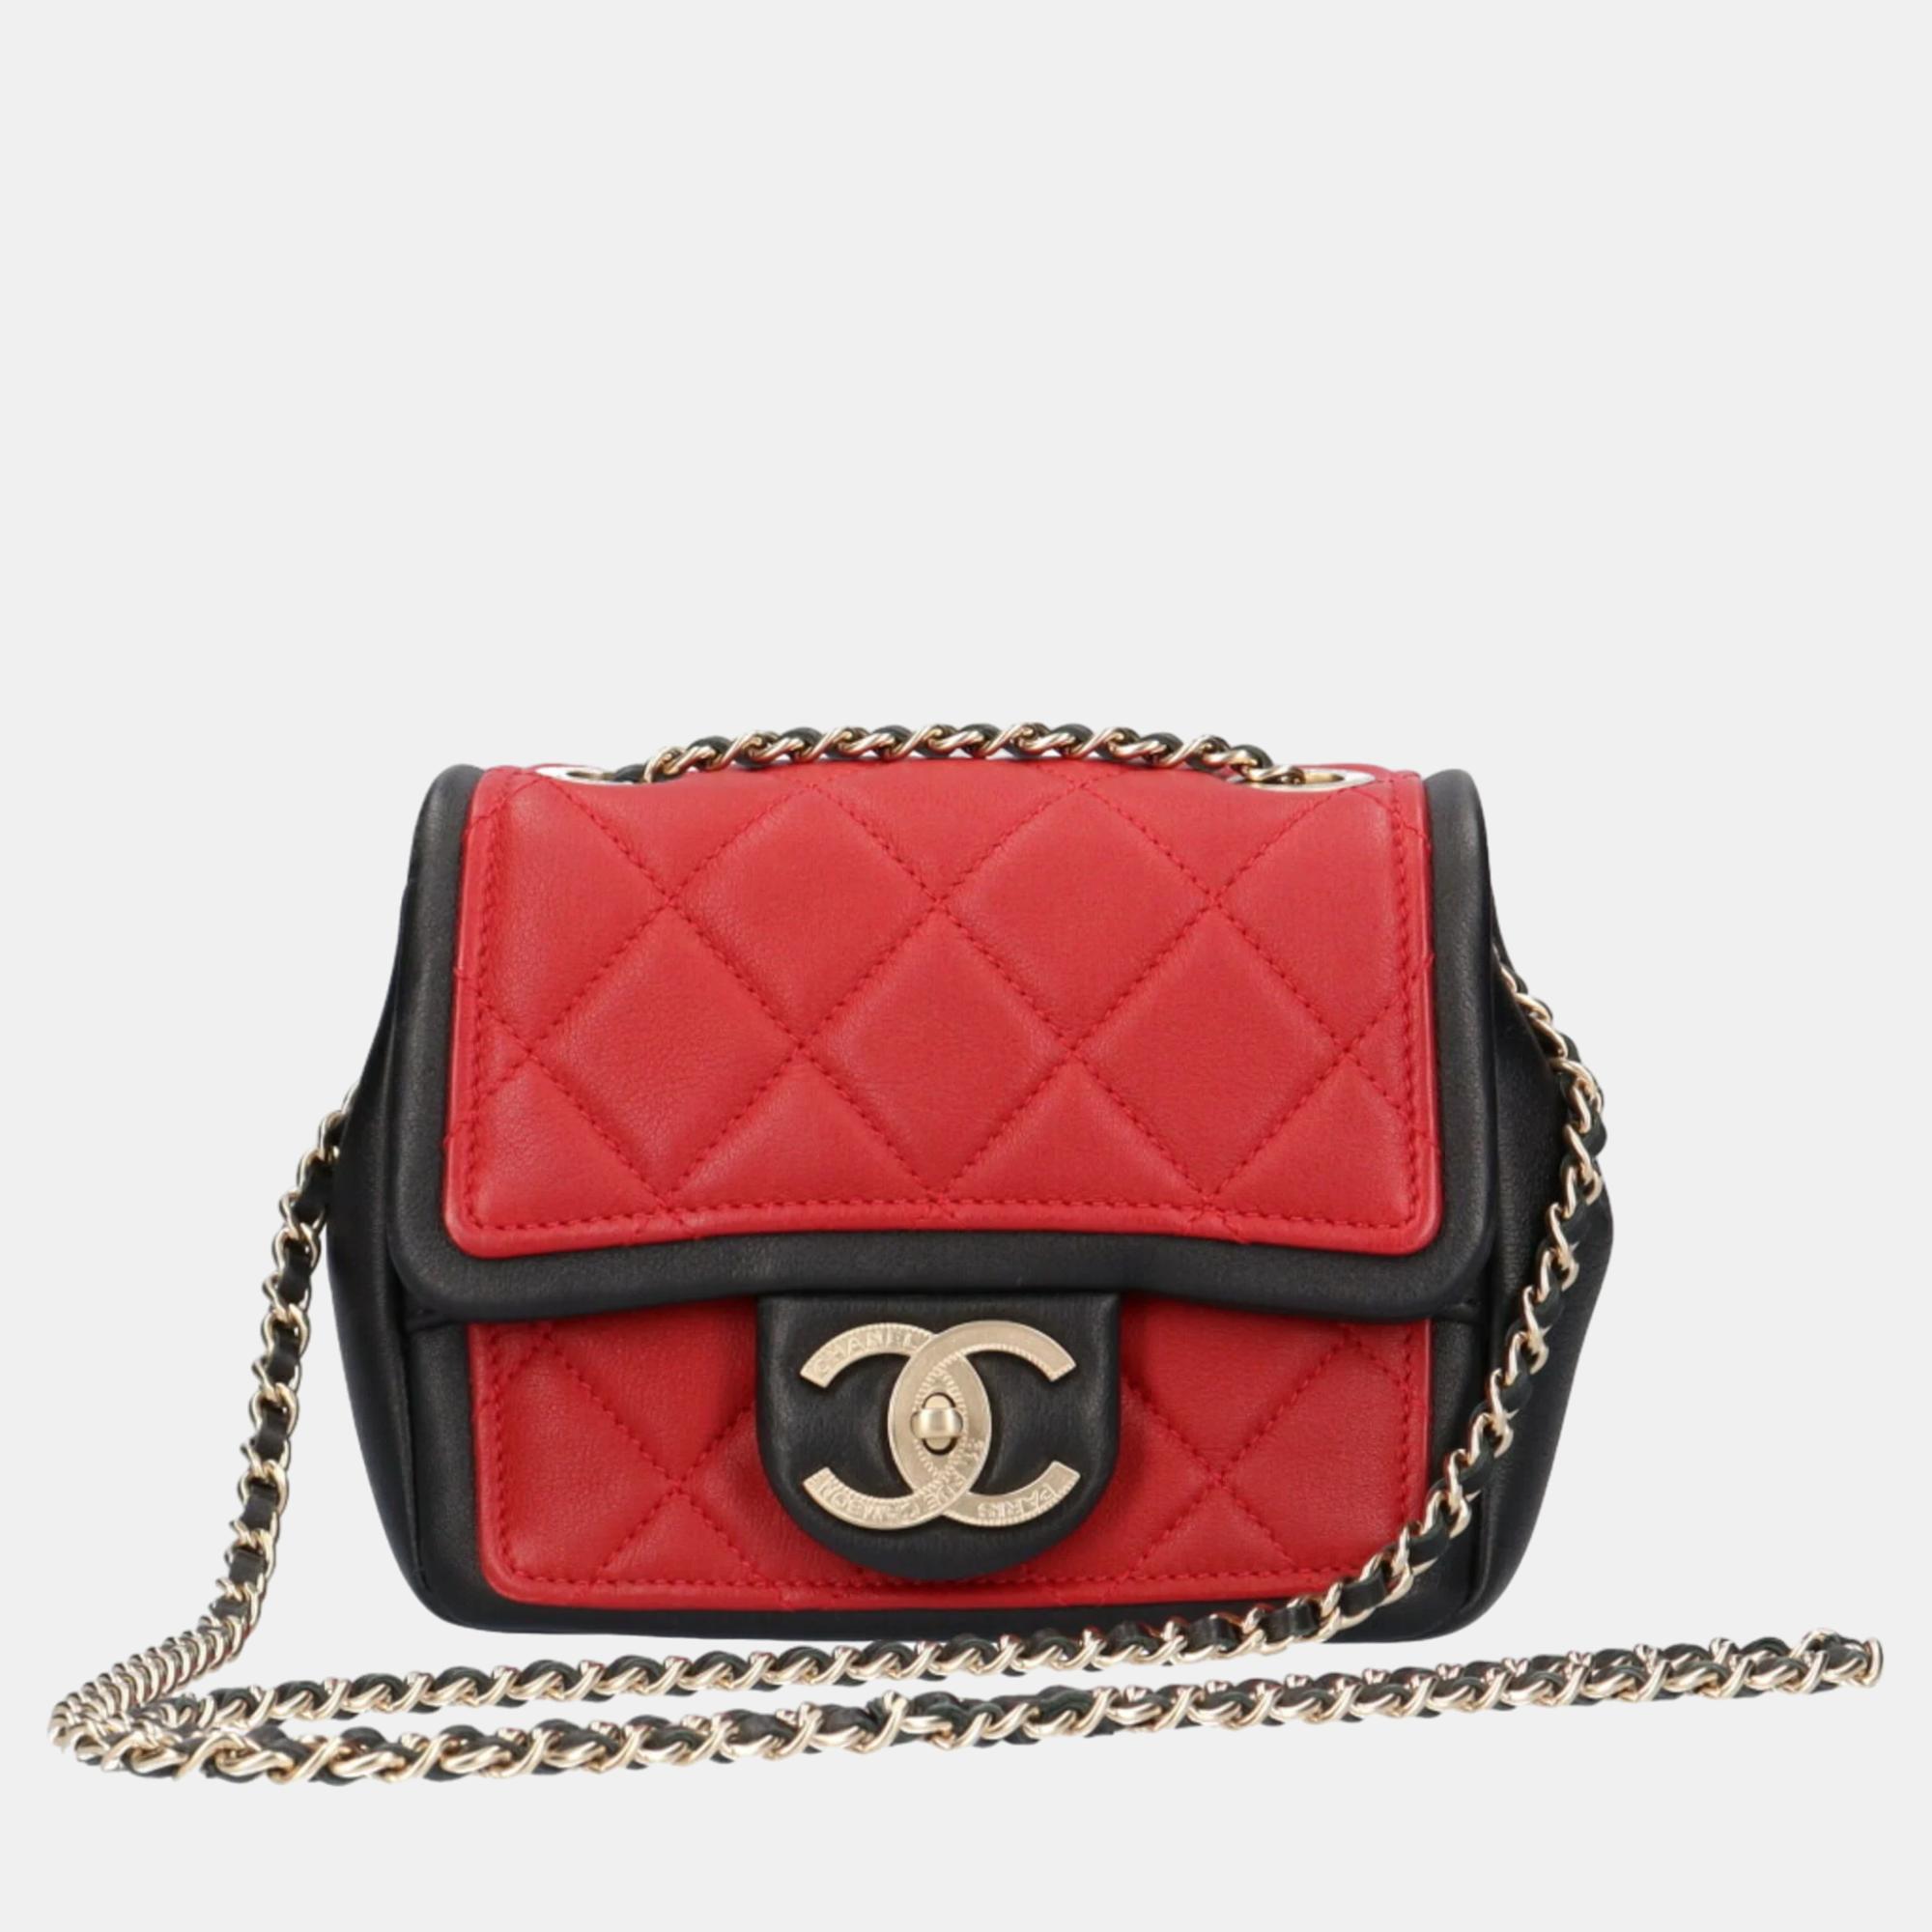 Chanel tricolor quilted lambskin mini graphic flap bag